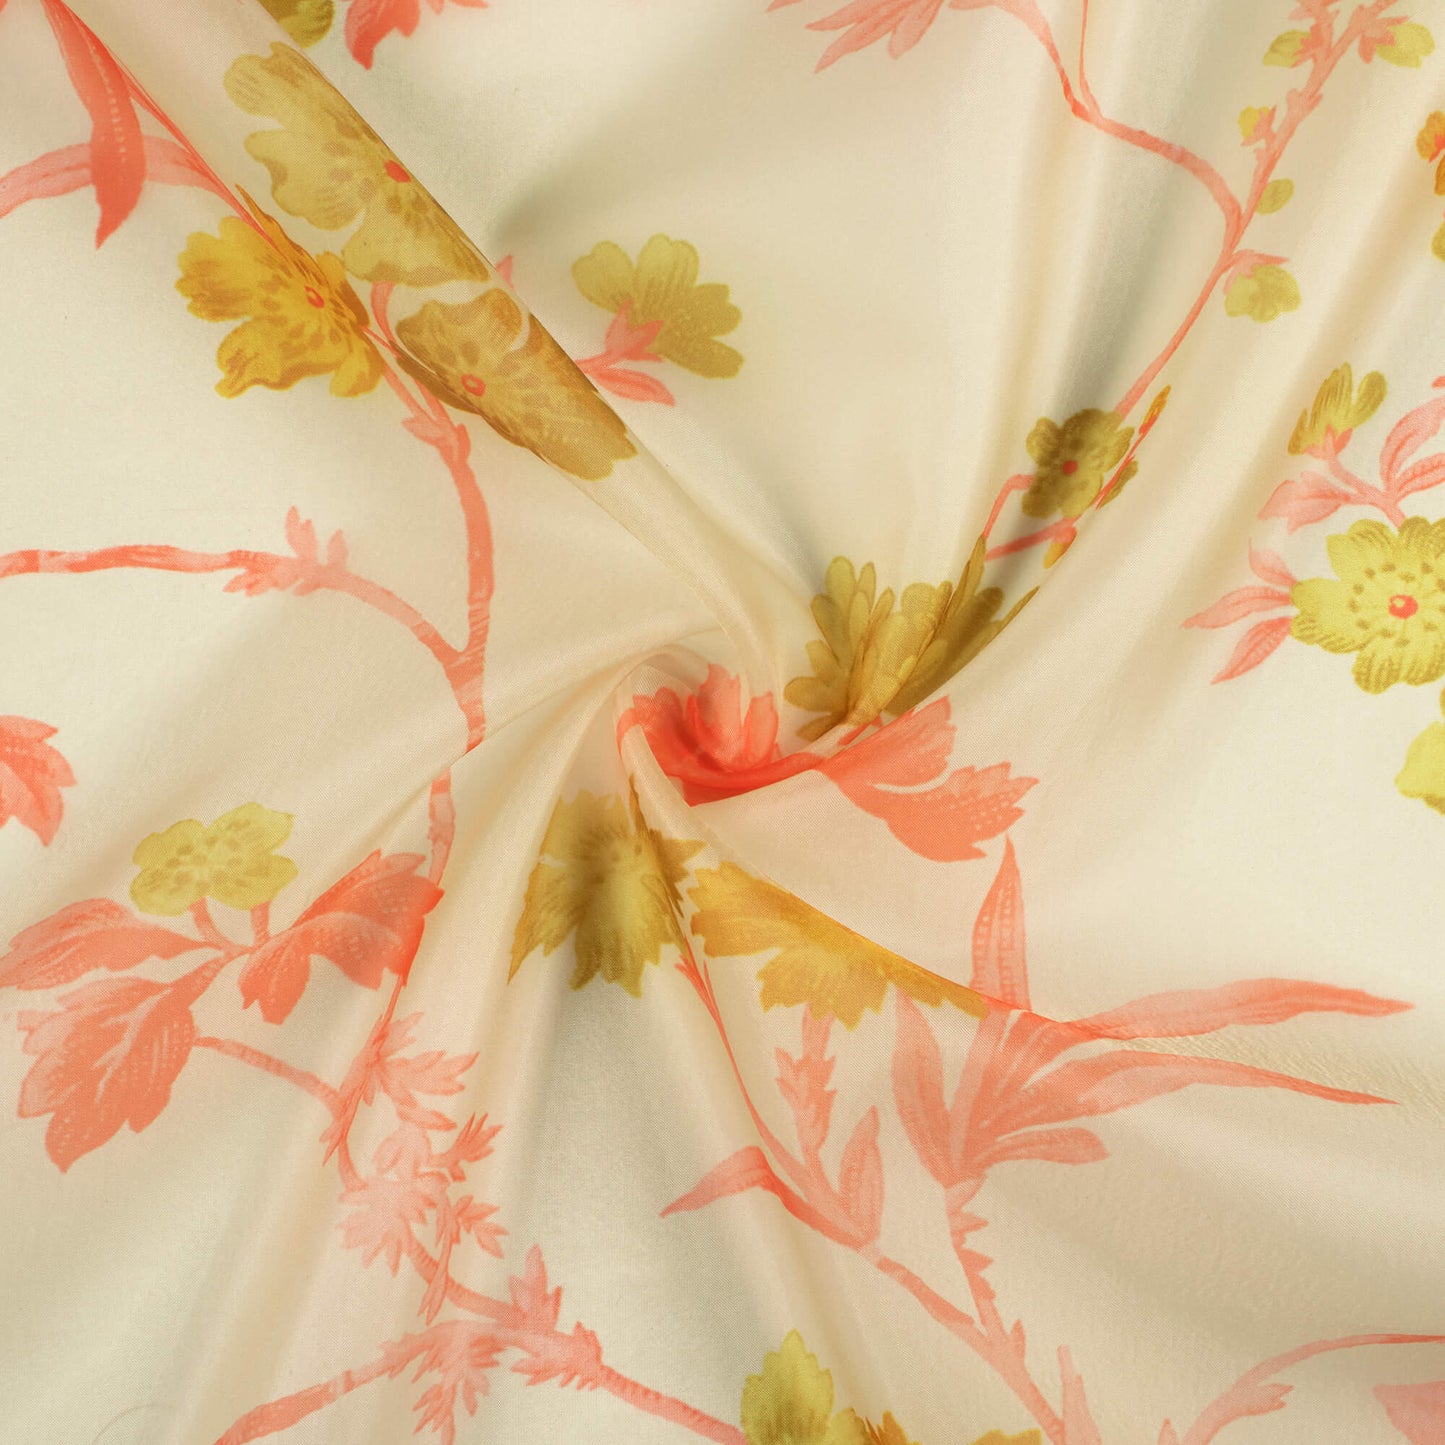 Mellow Yellow And Olive Green Floral Pattern Digital Print Organza Satin Fabric